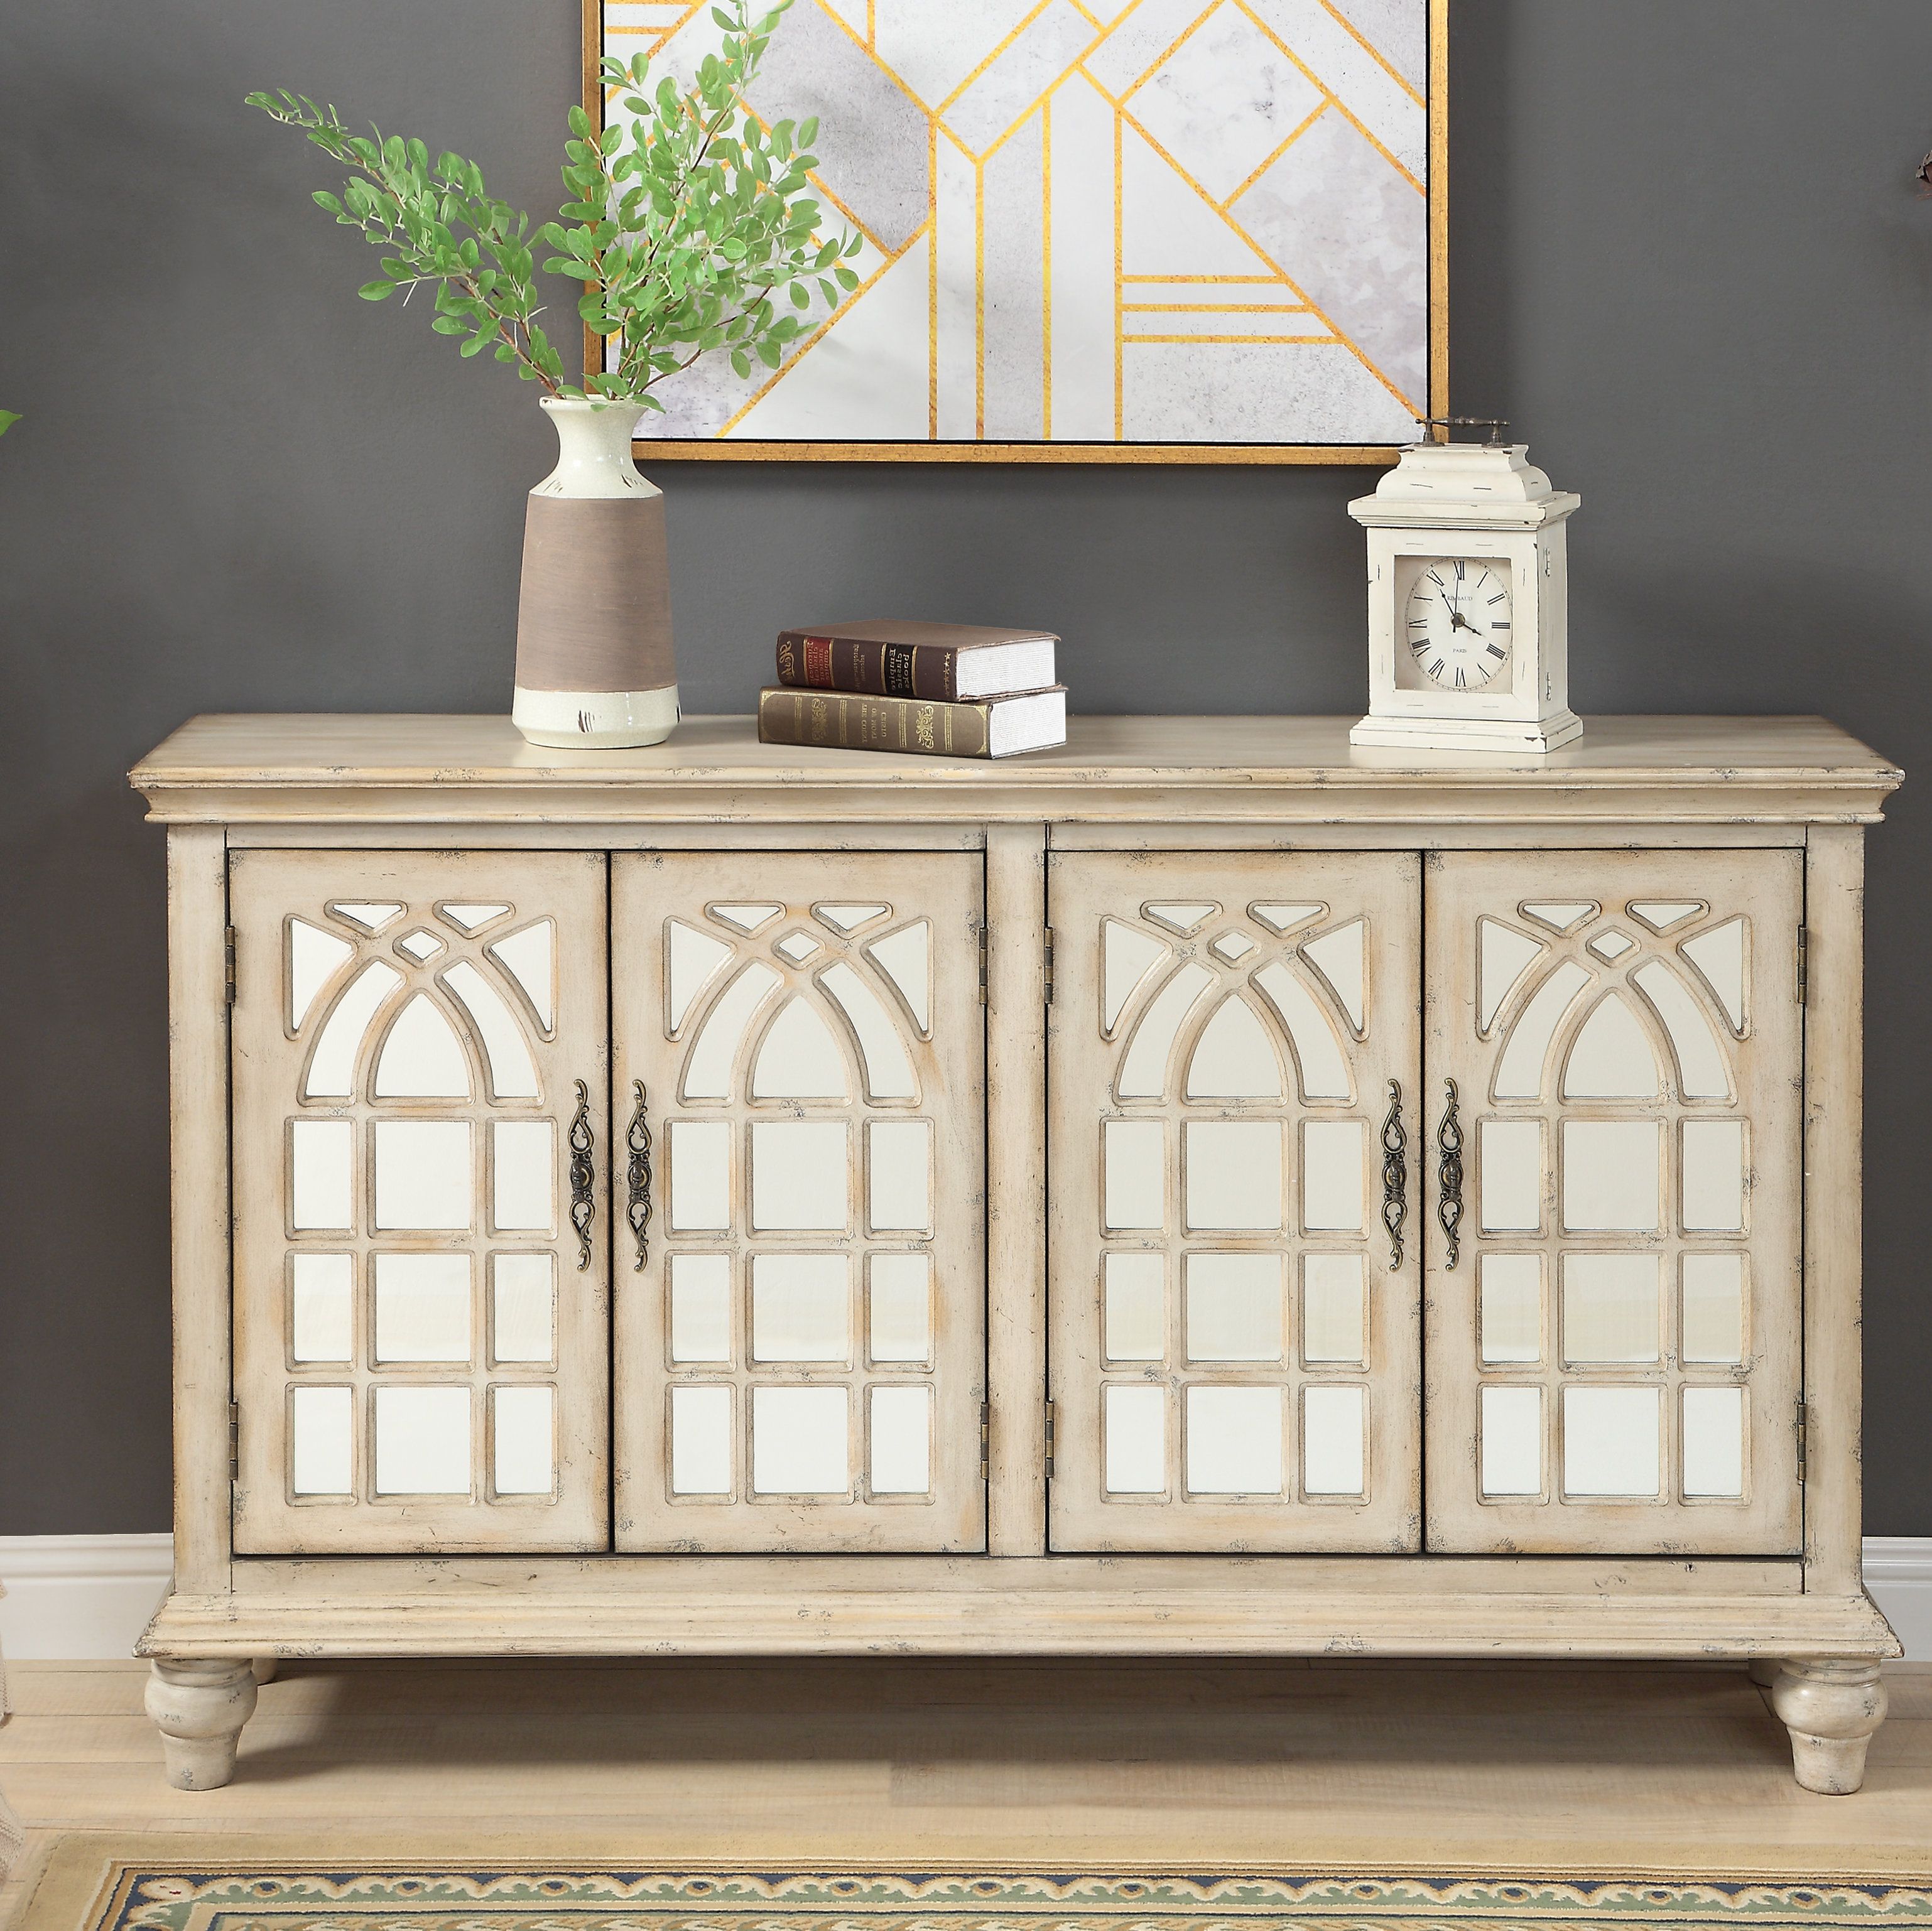 Living Room Credenza | Wayfair Throughout Current Lowrey Credenzas (View 20 of 20)